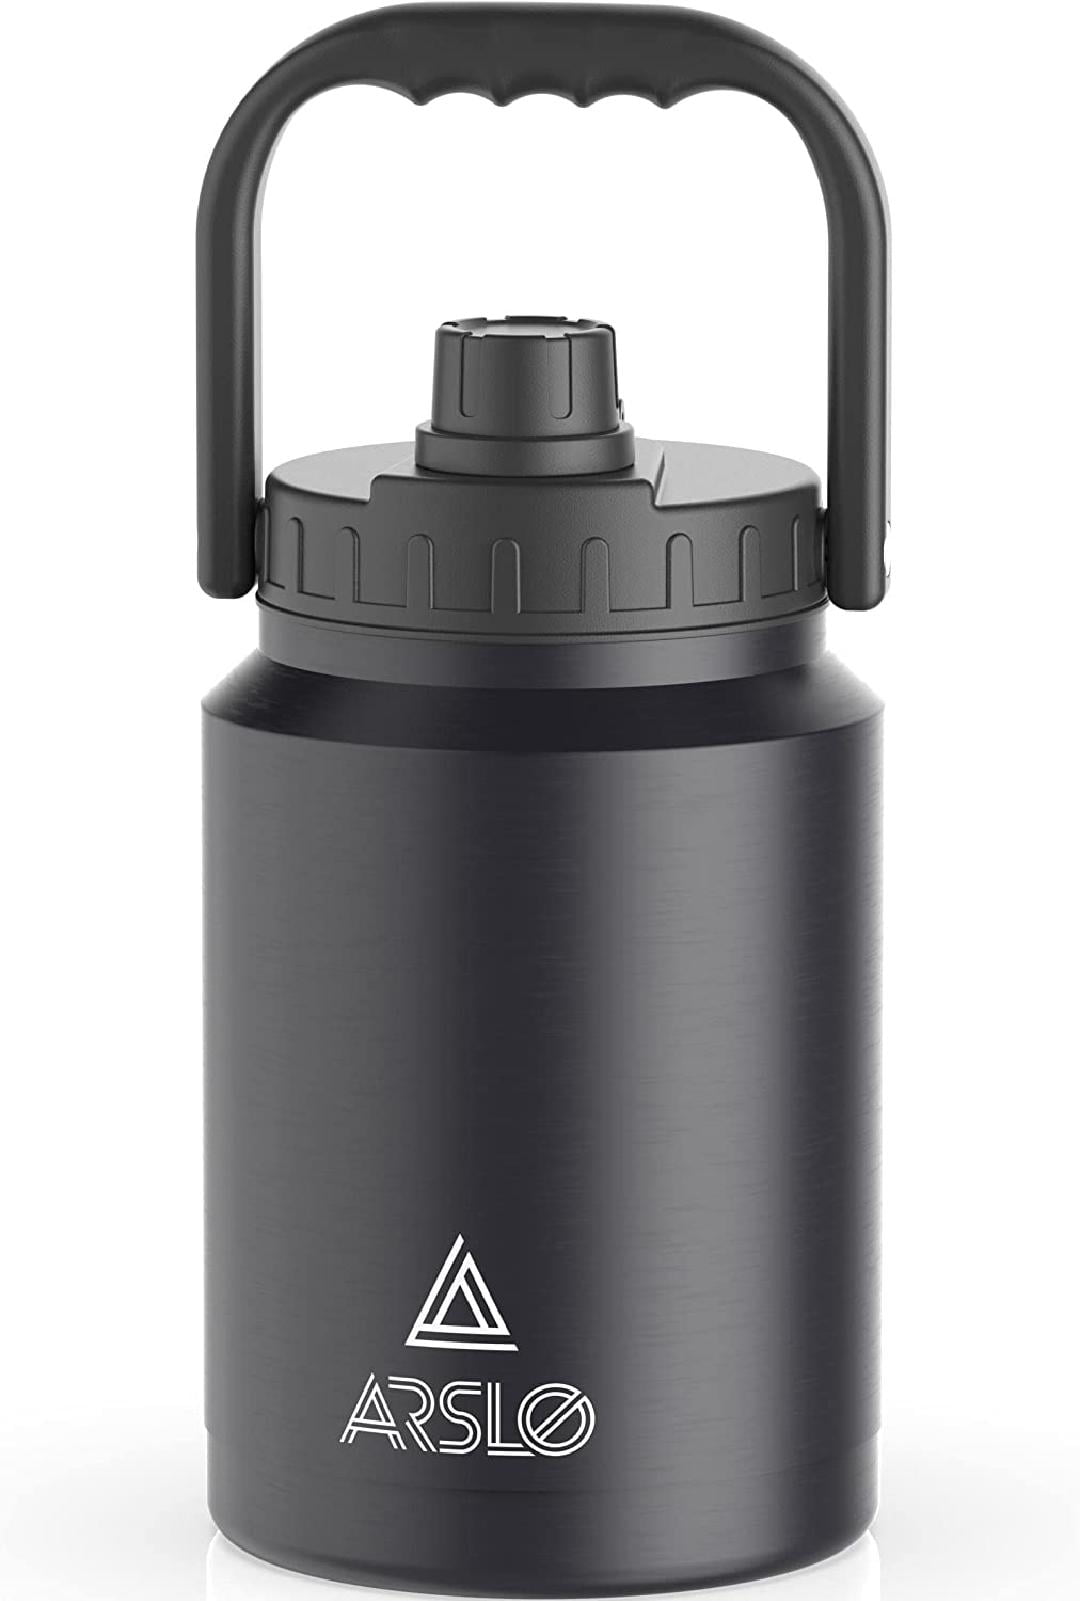 Arslo One Gallon Water Bottle, Large Insulated Water Jug With Handle, One  Gallon Stainless Steel Water Bottle,Black, 128 oz